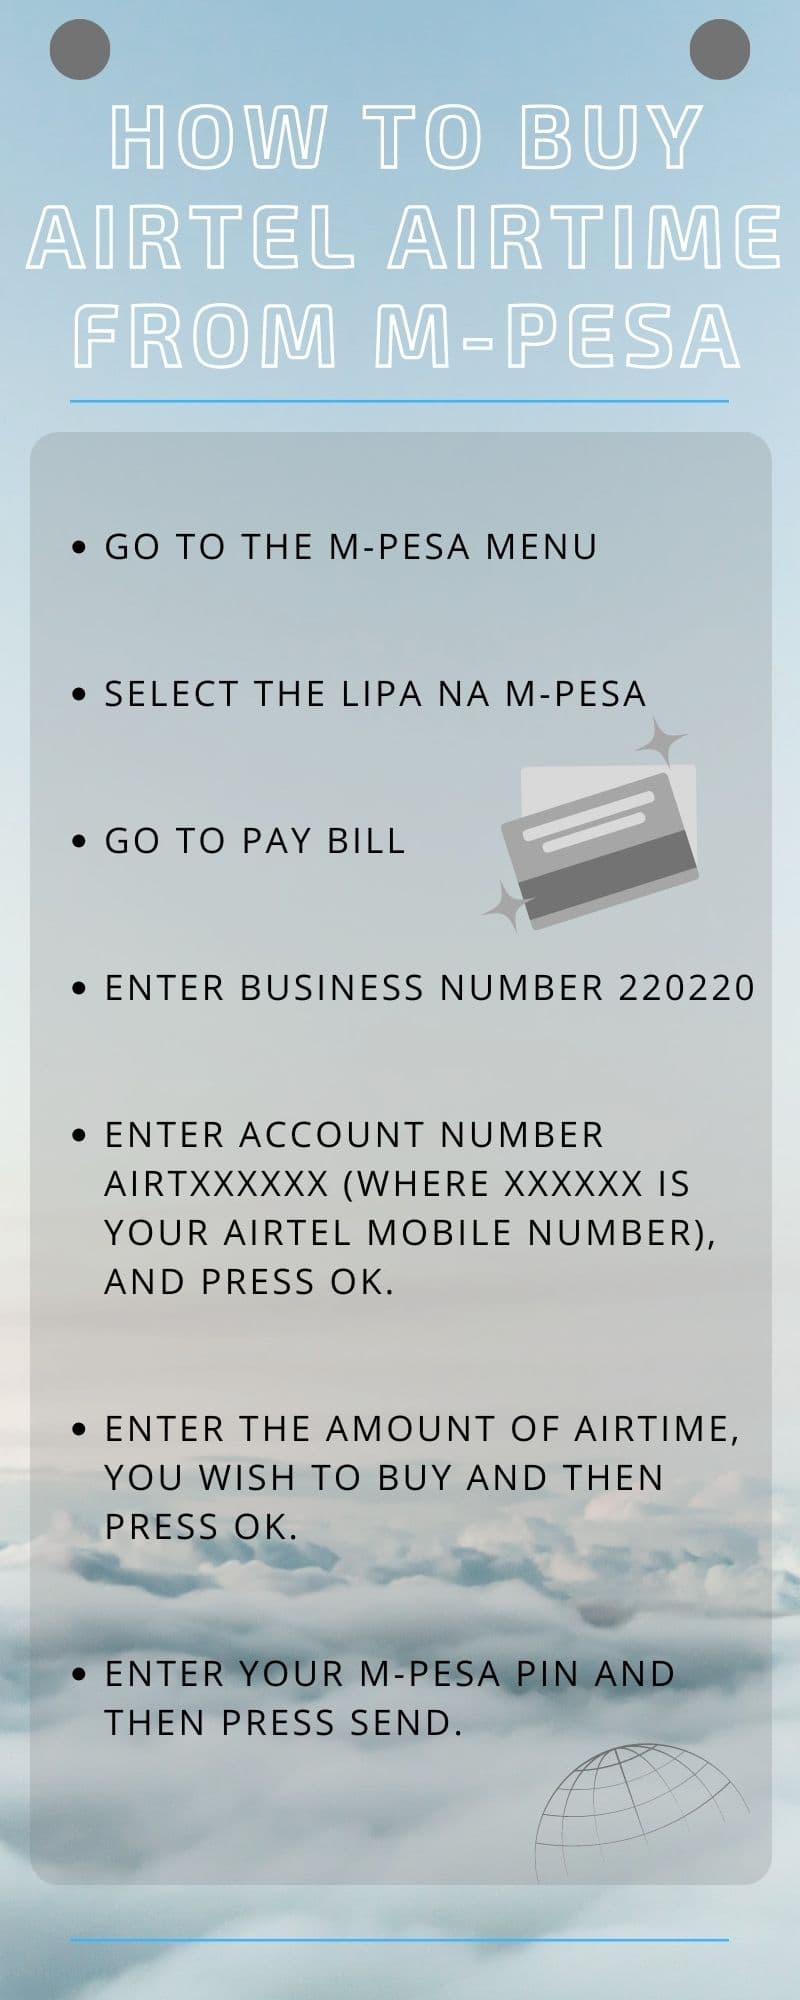 How to buy Airtel airtime from M-pesa